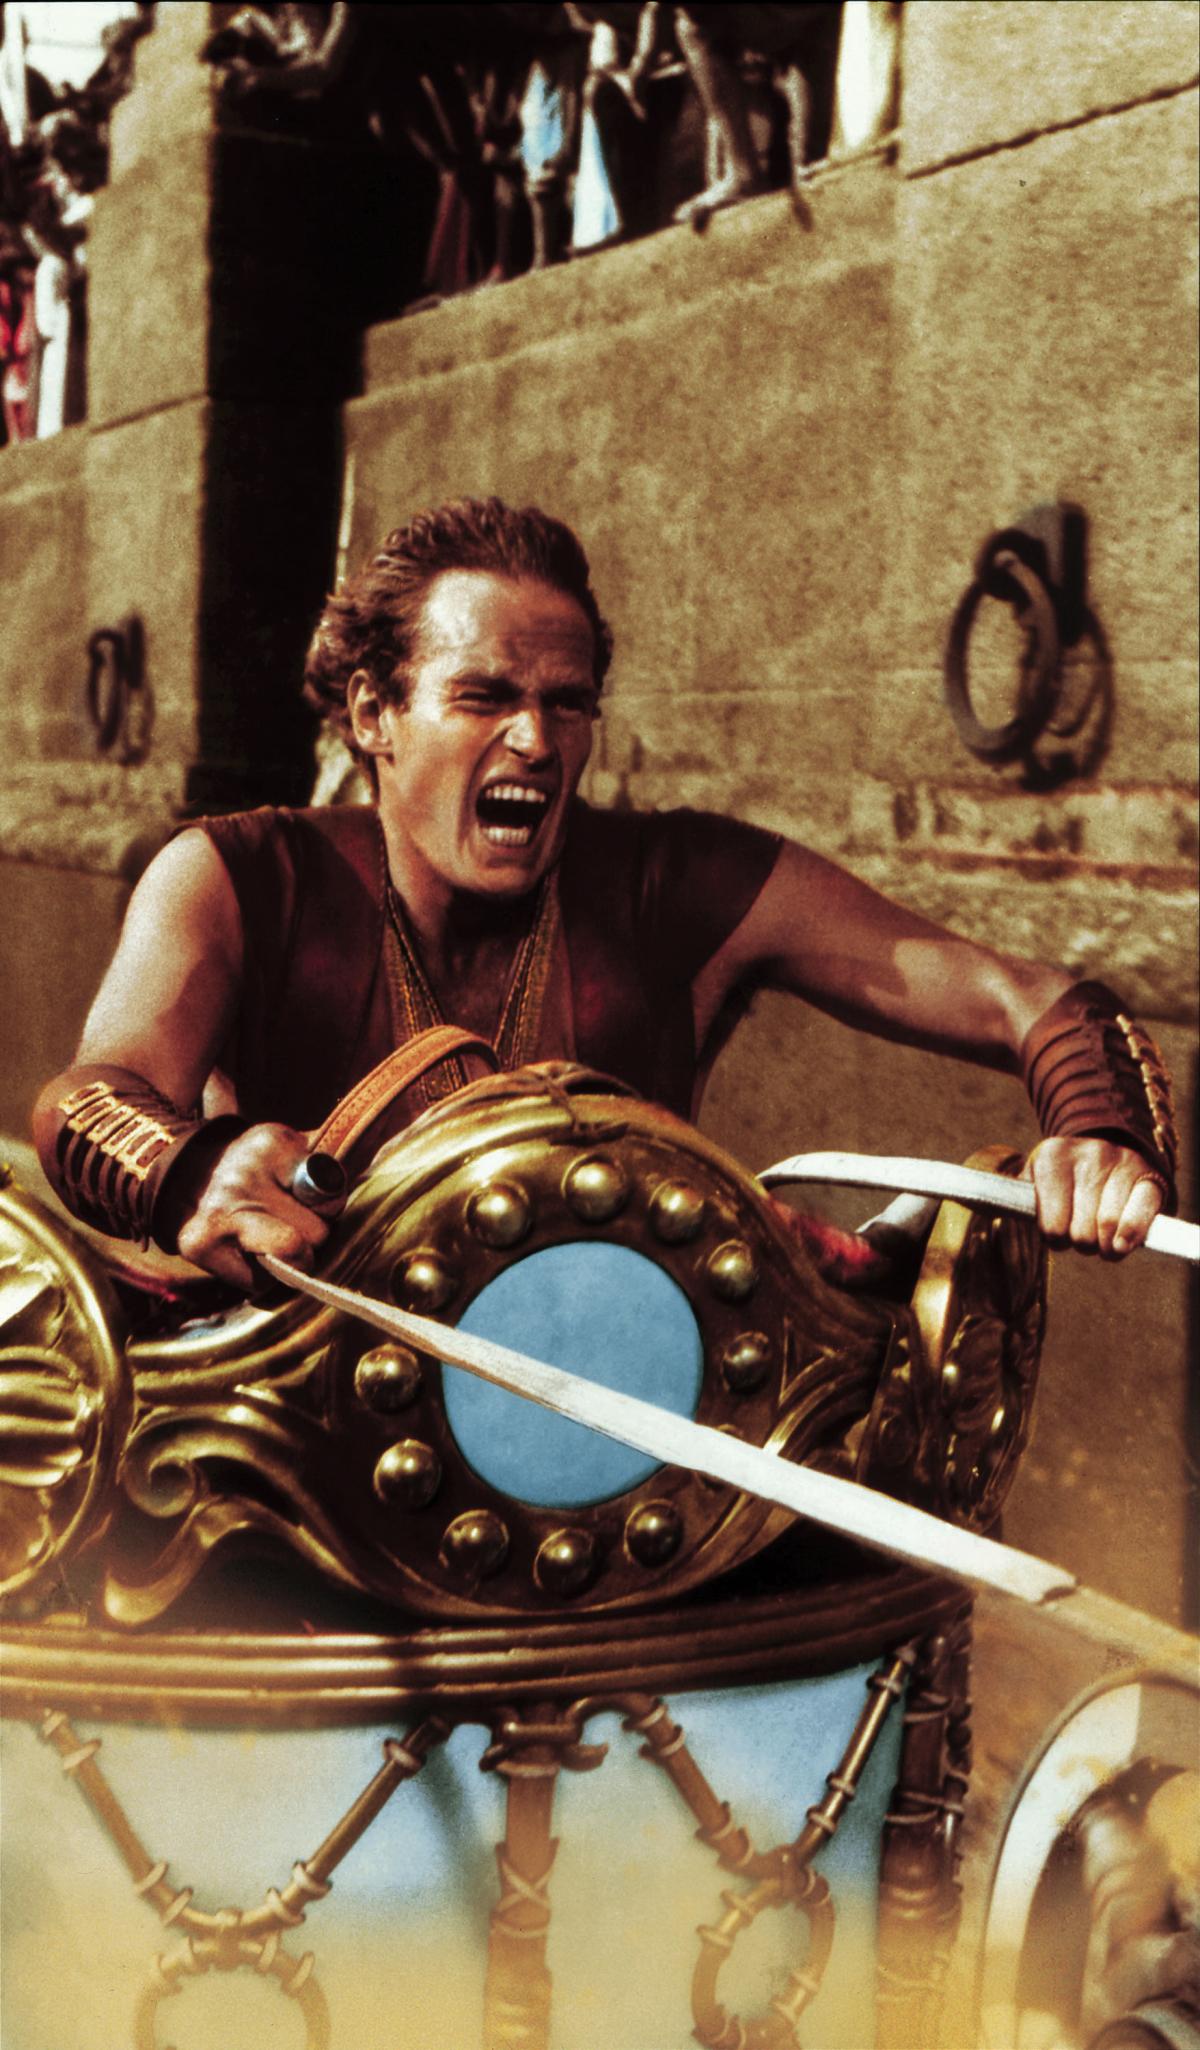 Heston, yelling, pulls on the reins of a chariot during a scene in Ben-Hur the movie